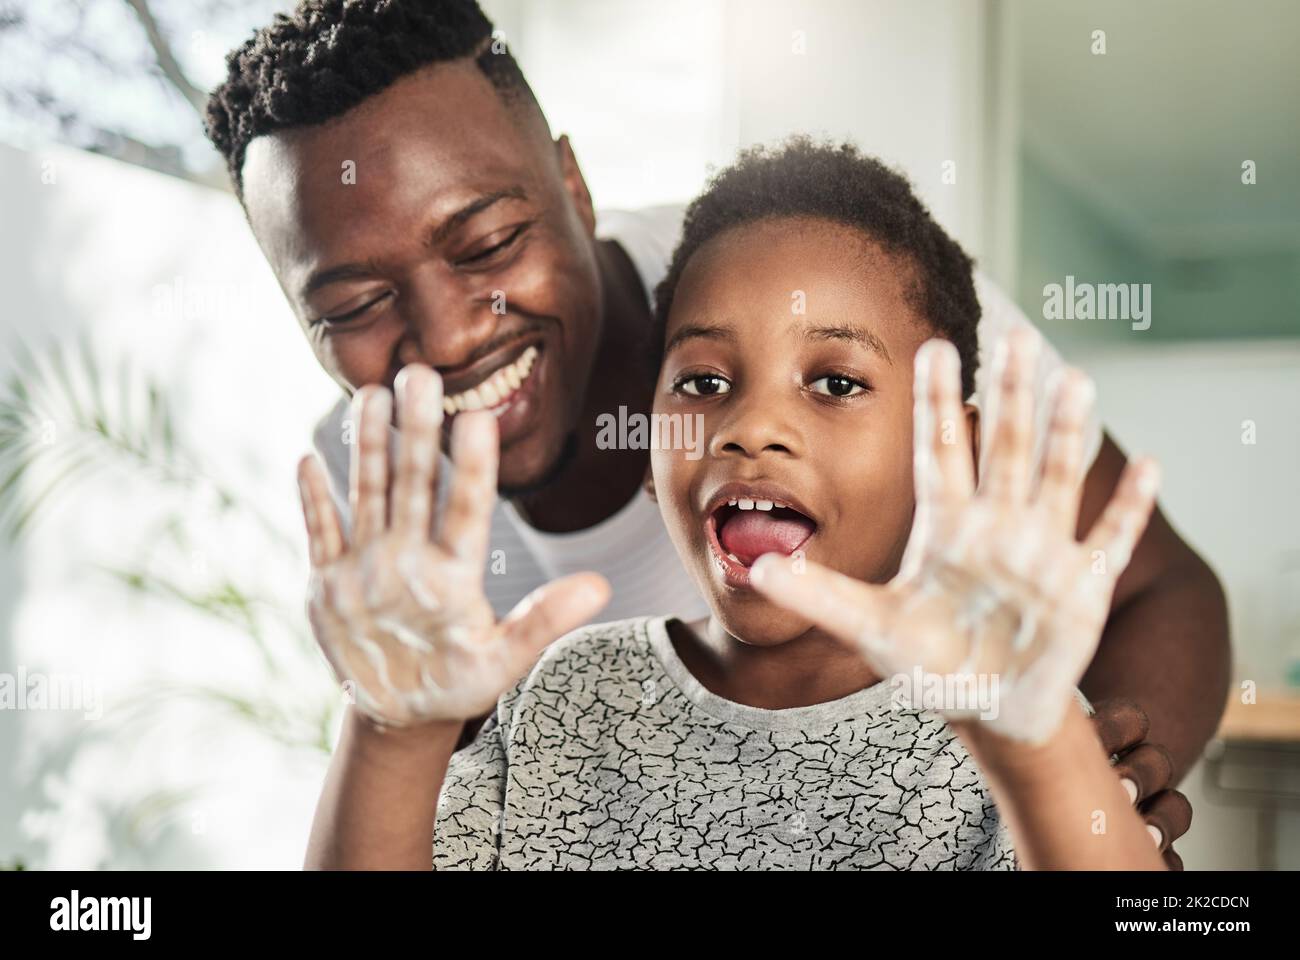 Good hygiene habits will keep you healthy. Portrait of a boy holding up his soapy hands while standing in a bathroom with his father at home. Stock Photo